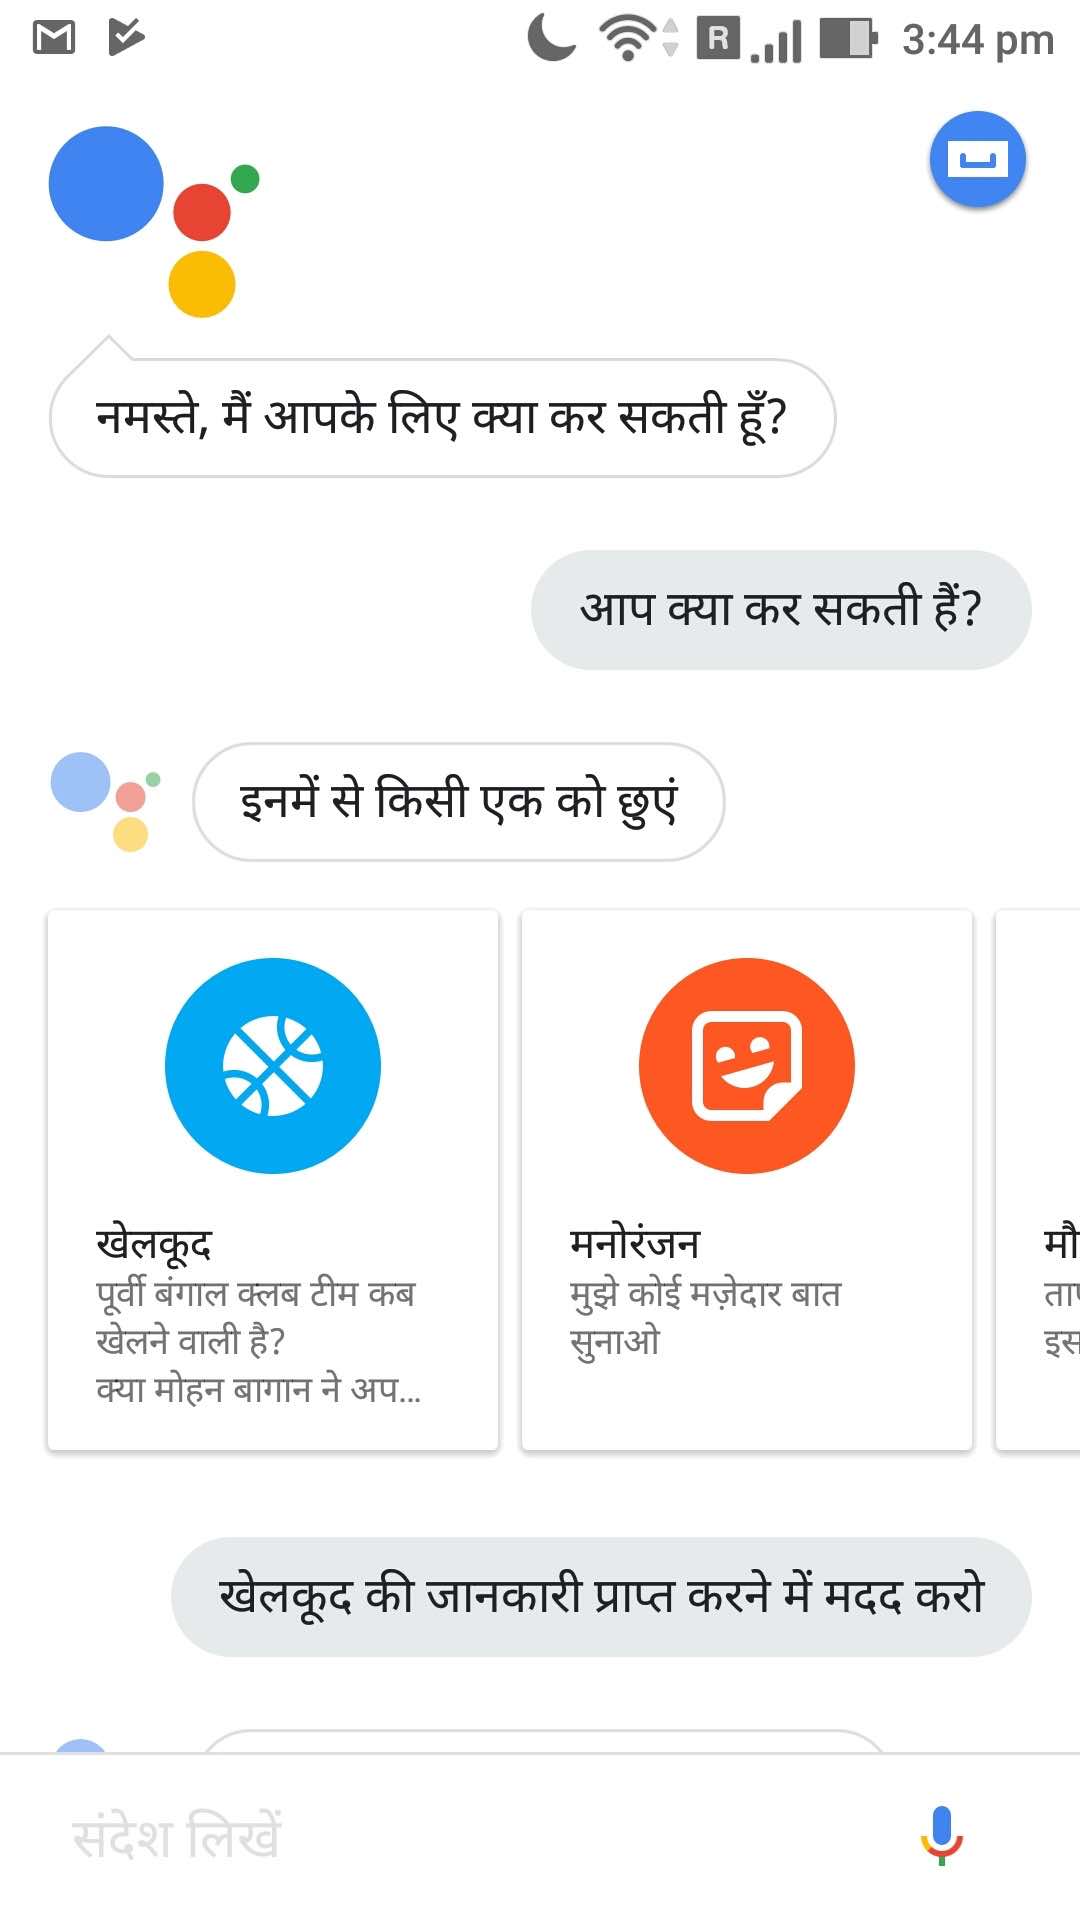 Google Assistant in Hindi